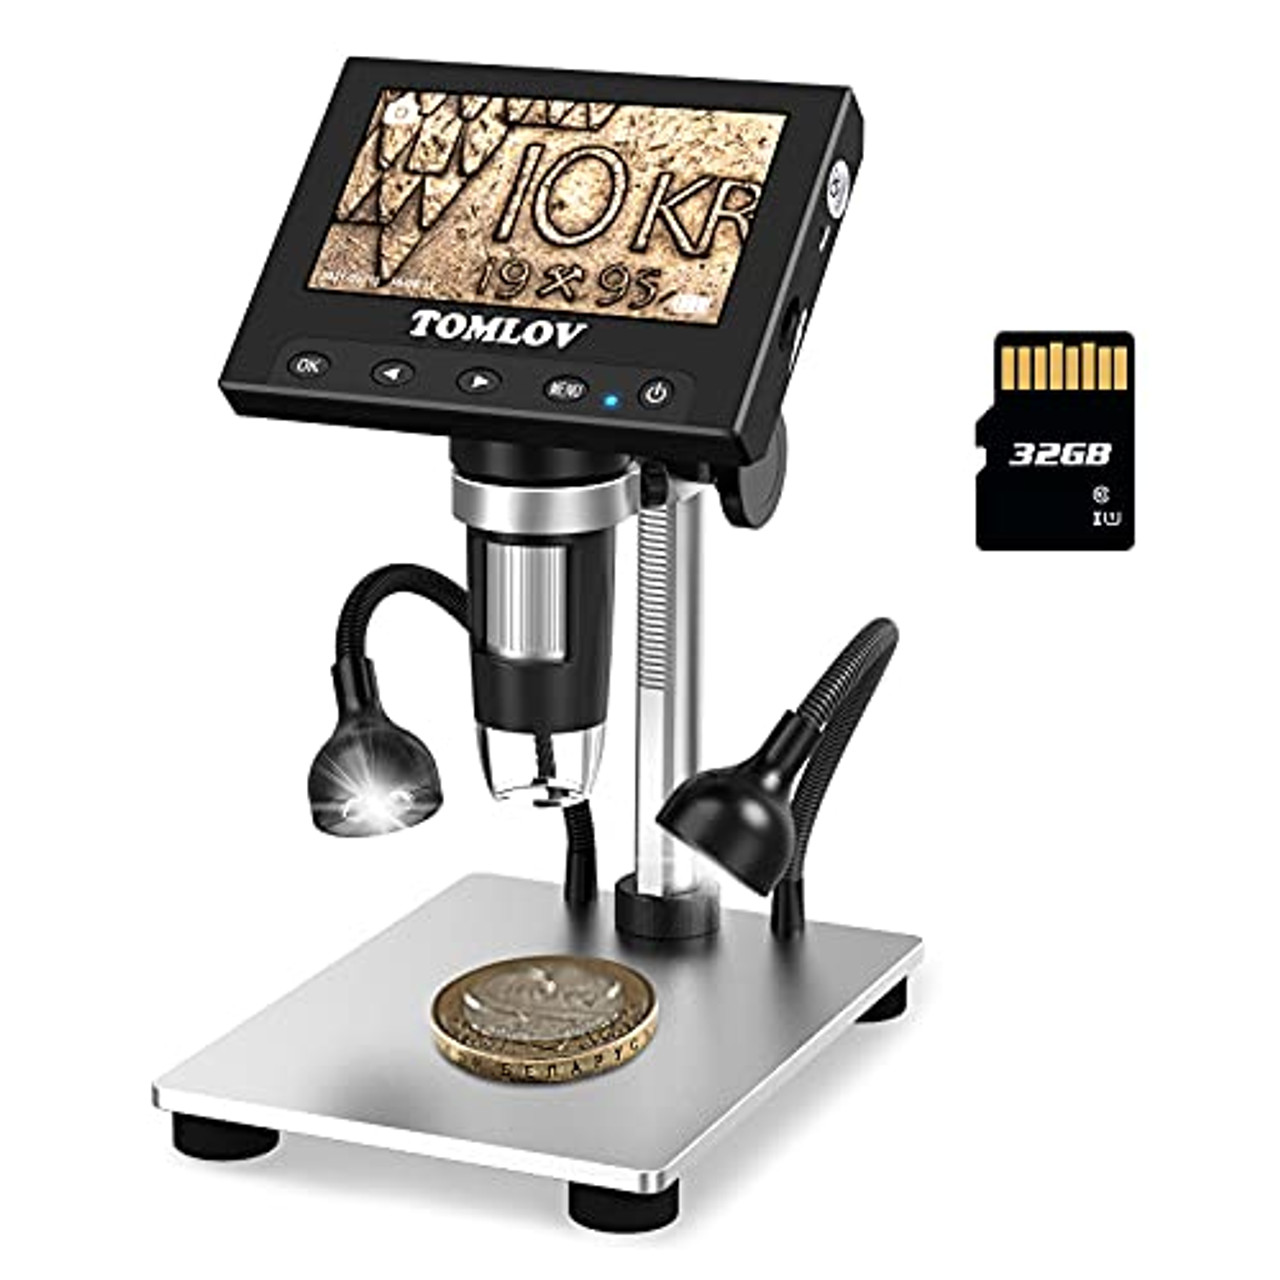 Windaus Stand magnifying glass, with light